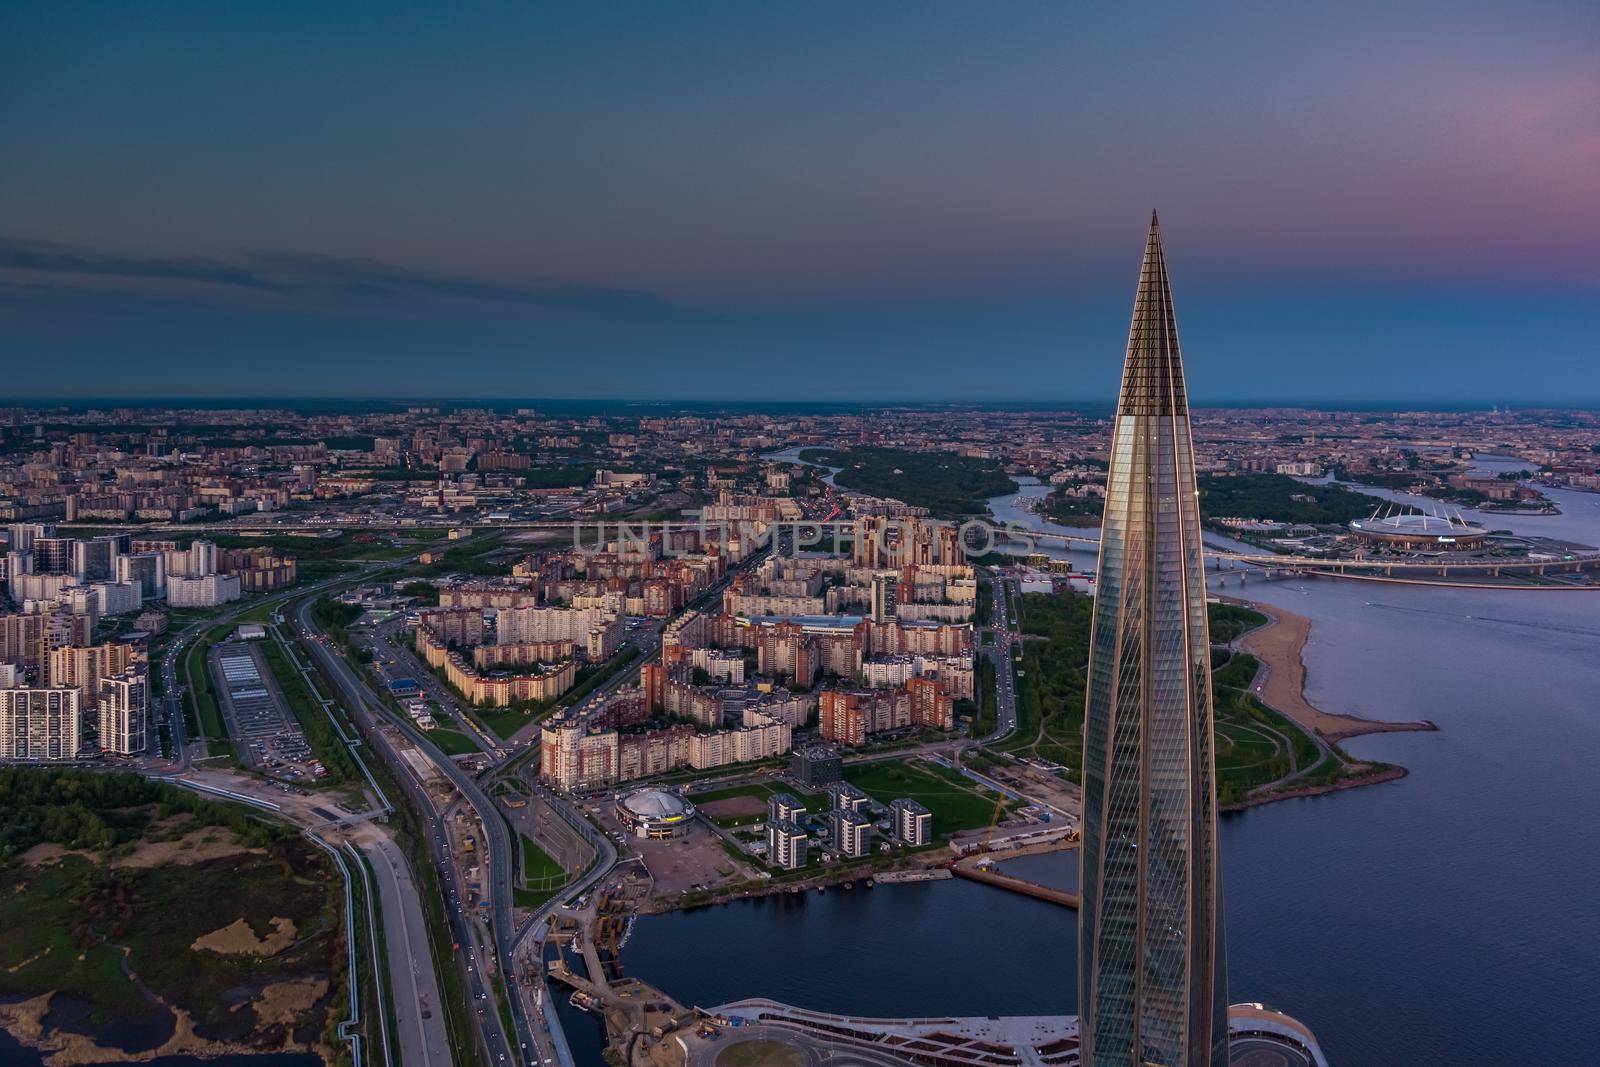 Russia, St.Petersburg, 16 May 2021: Drone point of view of highest skyscraper in Europe Lakhta Center at pink sunset, Headquarters of the oil company Gazprom, stadium Gazprom Arena on background by vladimirdrozdin